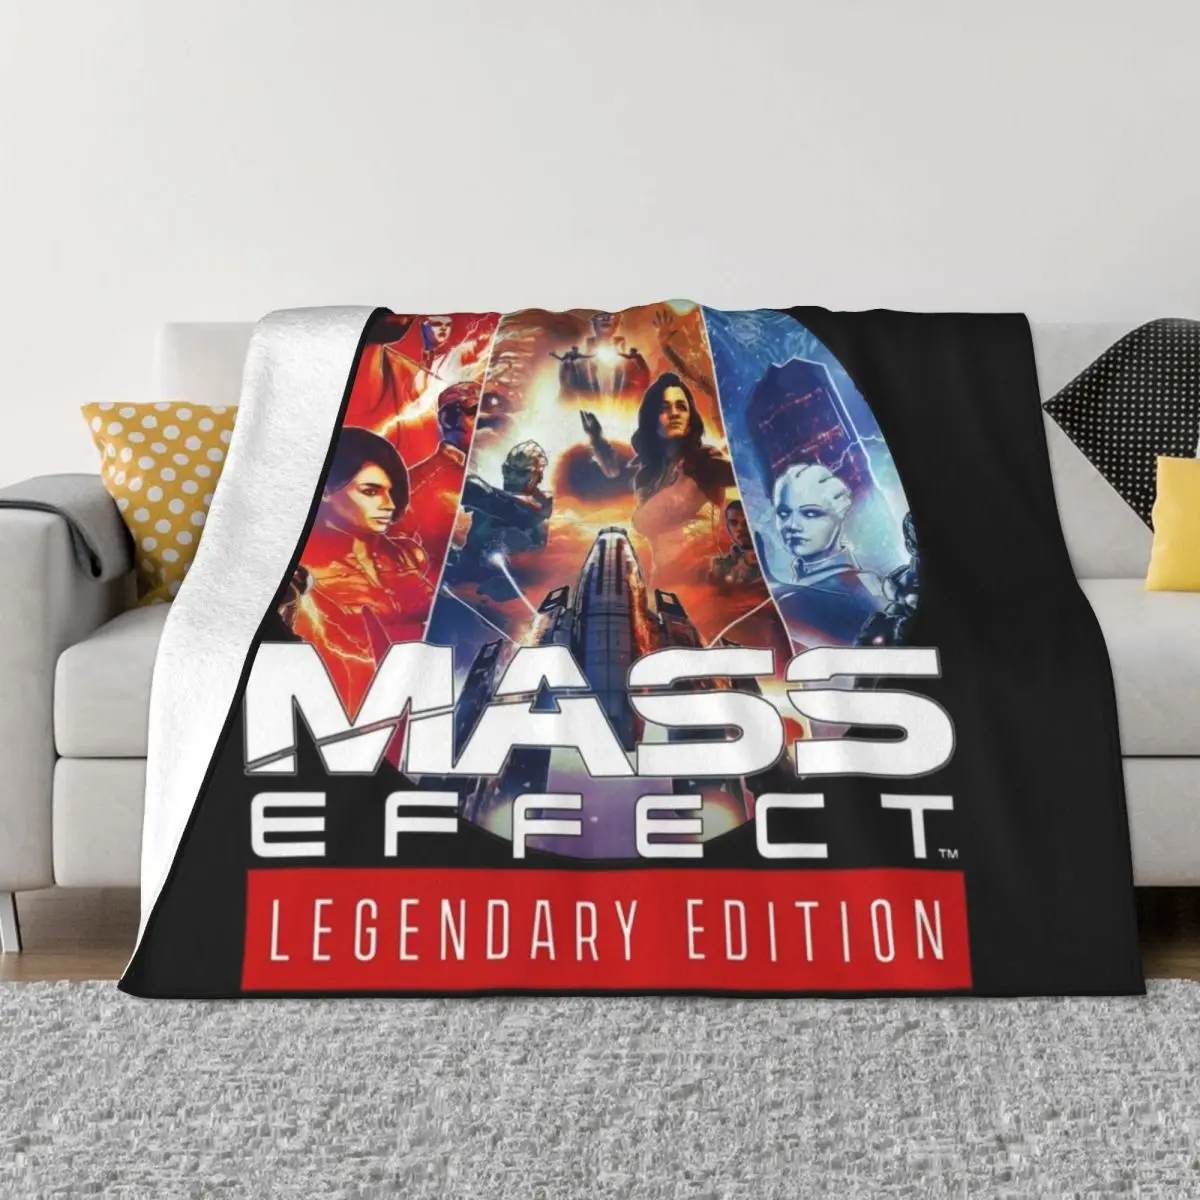 

Mass Effect: Legendary Edition (Trilogy) - Alternate Throw Blanket Weighted Blanket Thermal Blankets For Travel